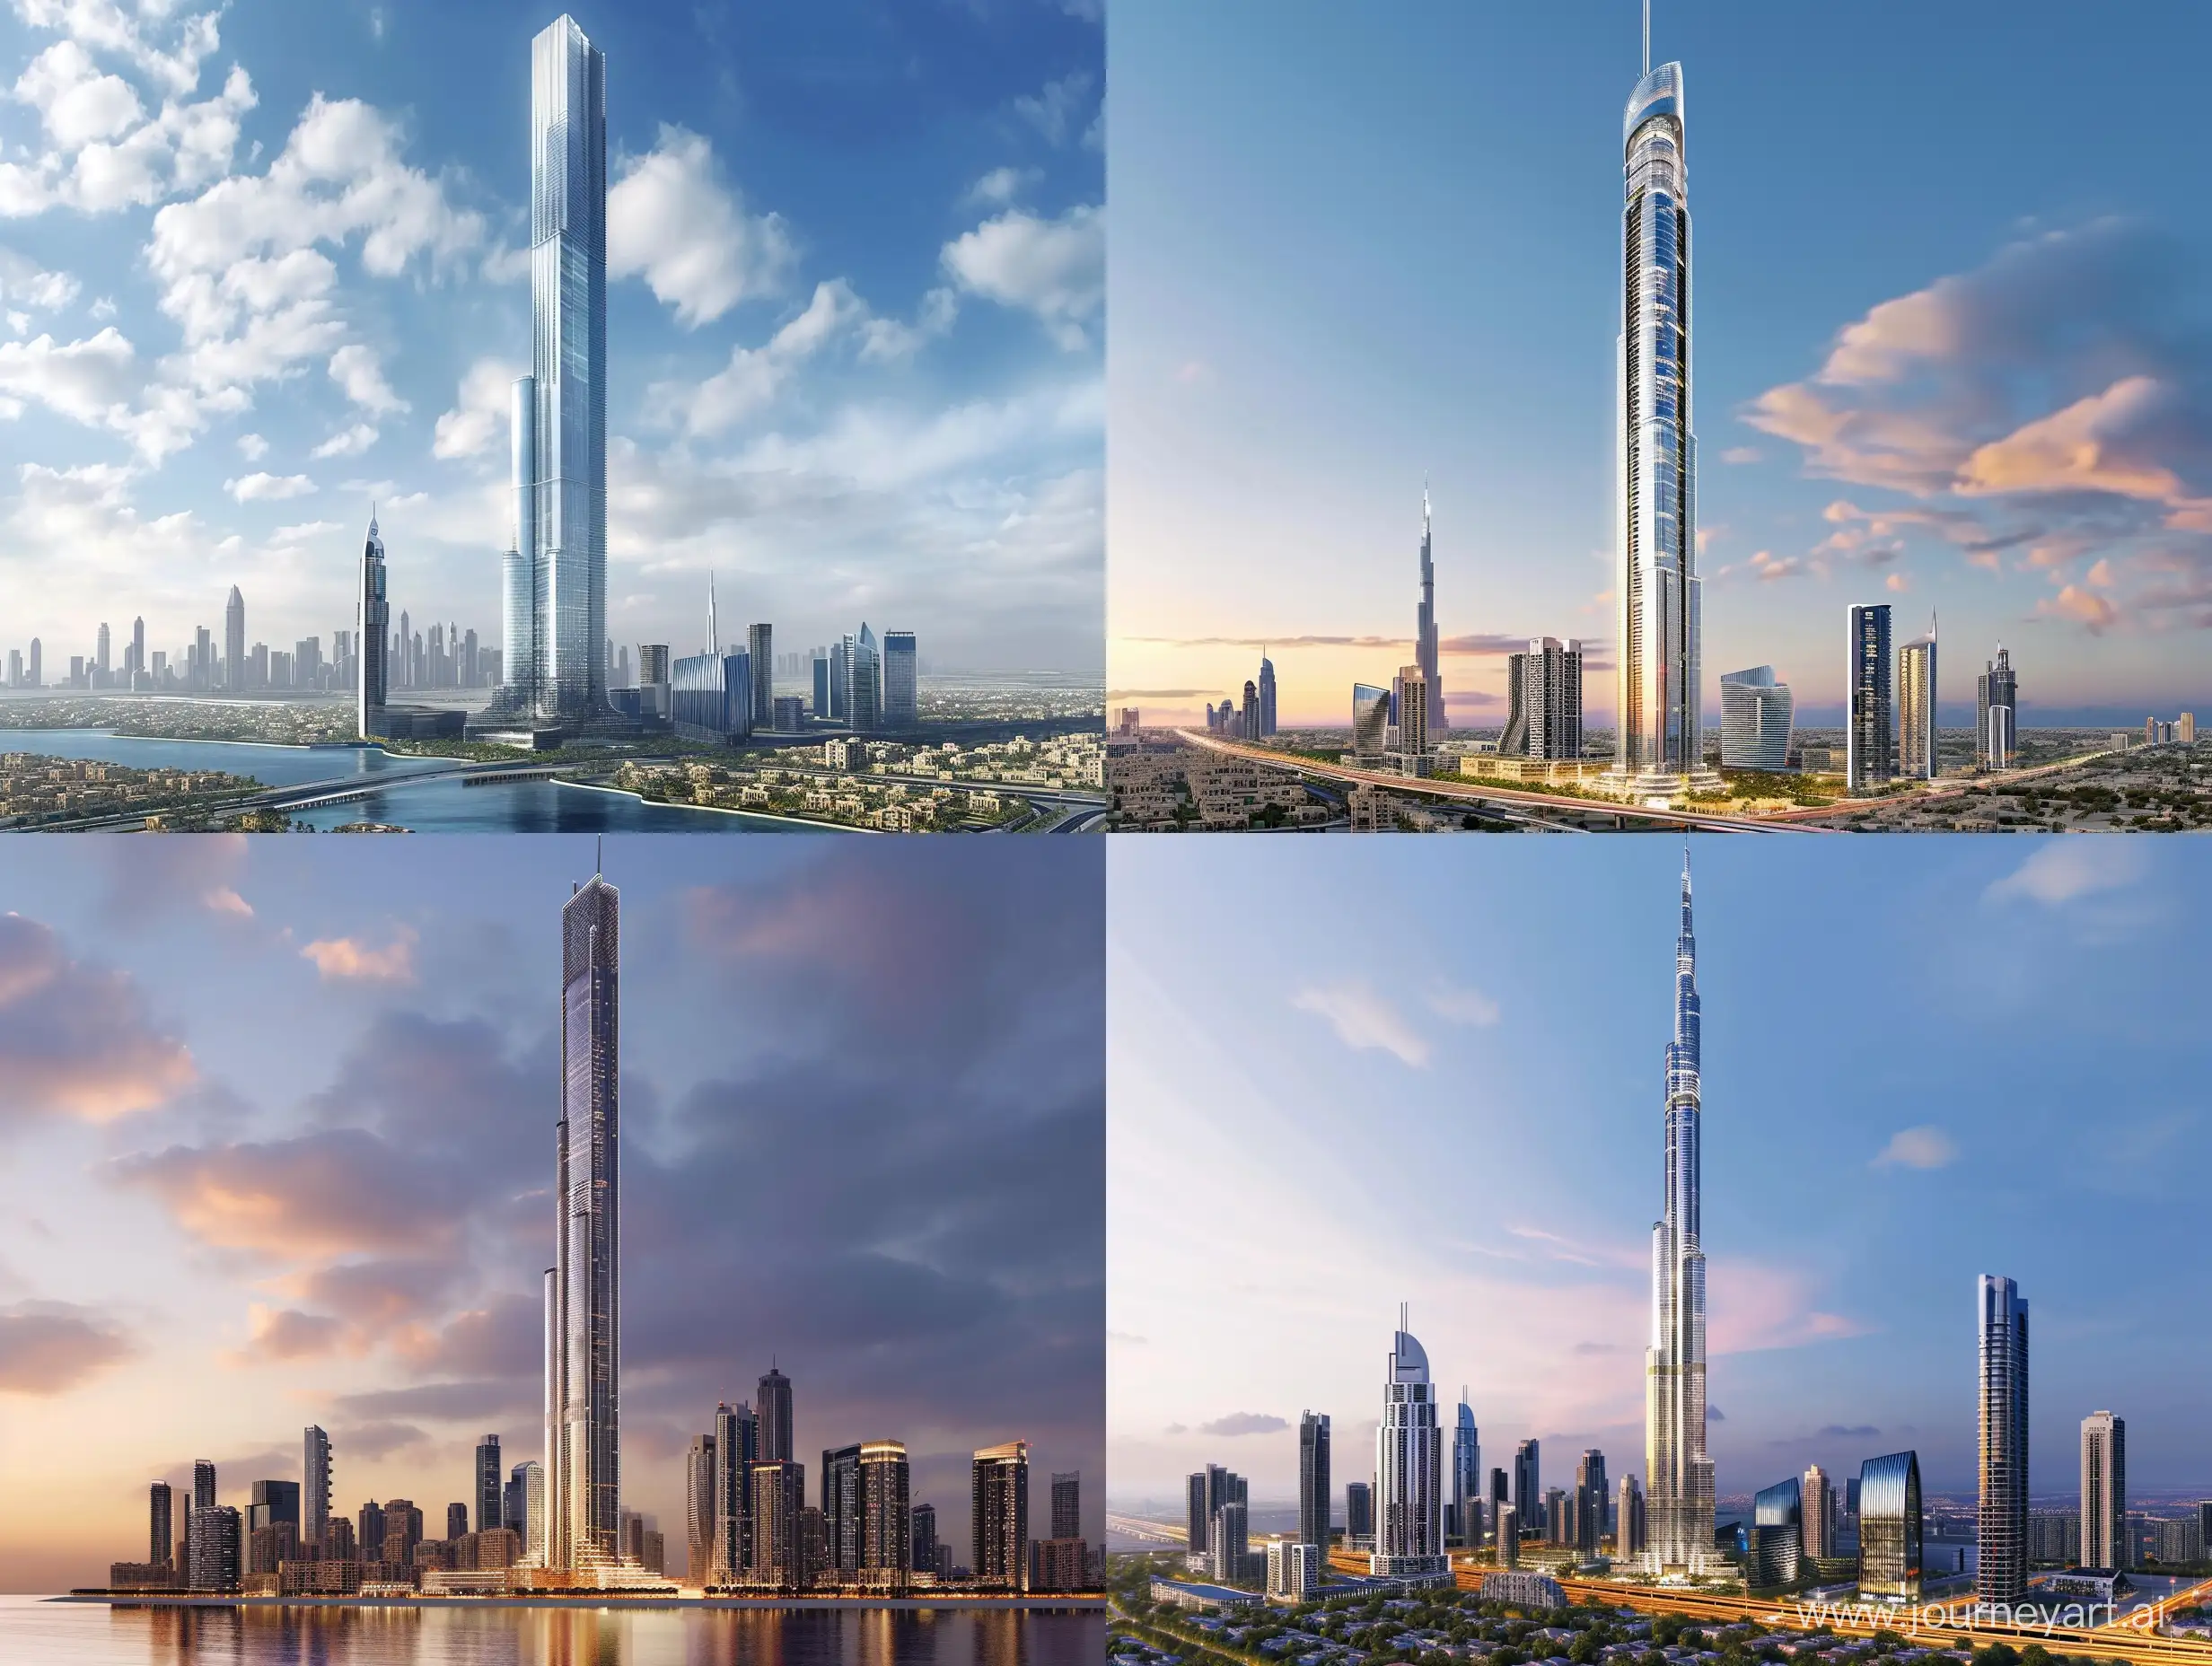 a modern skyscraper with a height of at least 500 meters with an exterior design inspired by Italian architecture which suits the skyline of Dubai